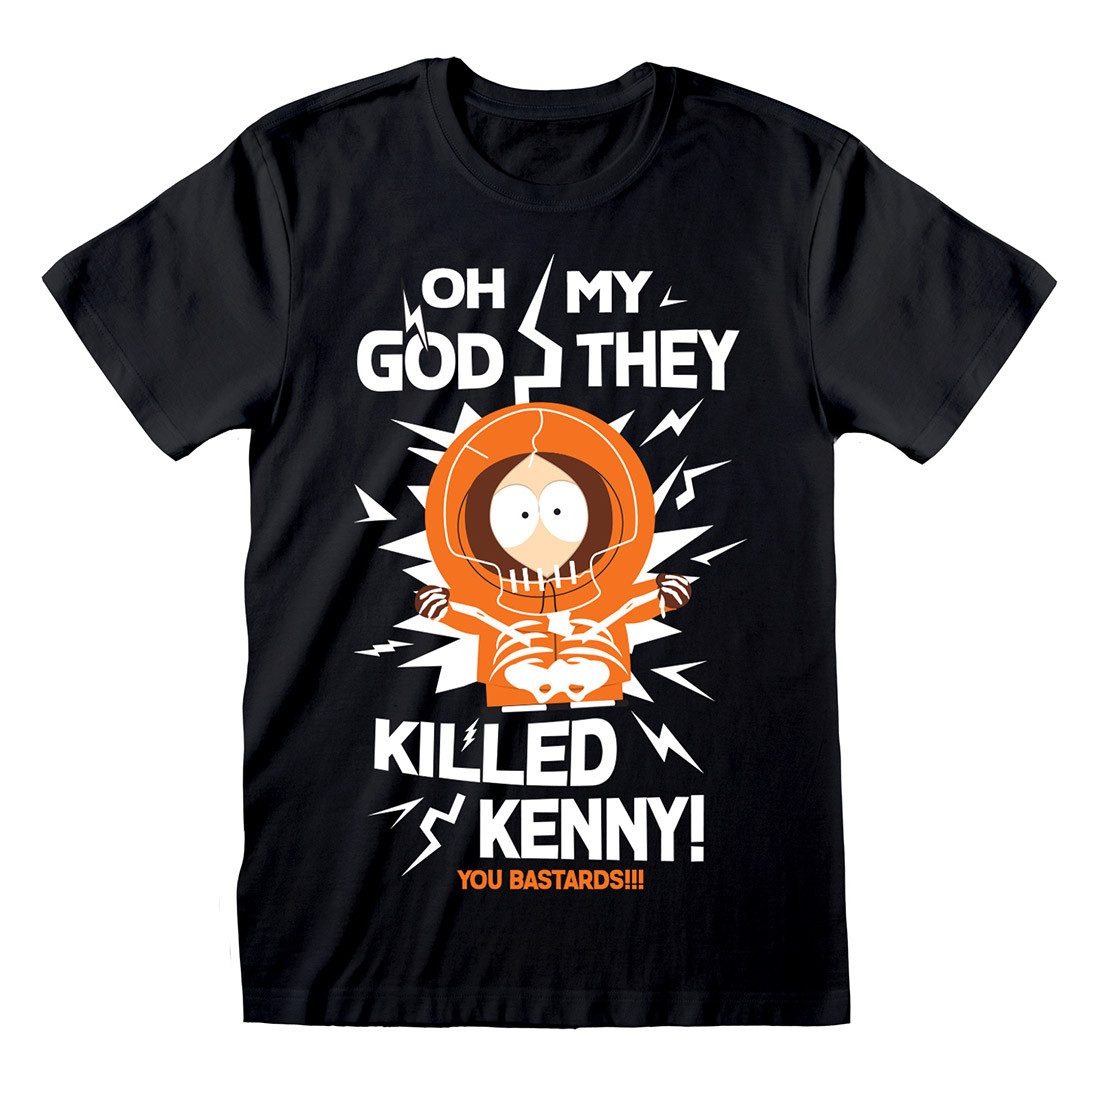 South Park T-Shirt They Killed Kenny